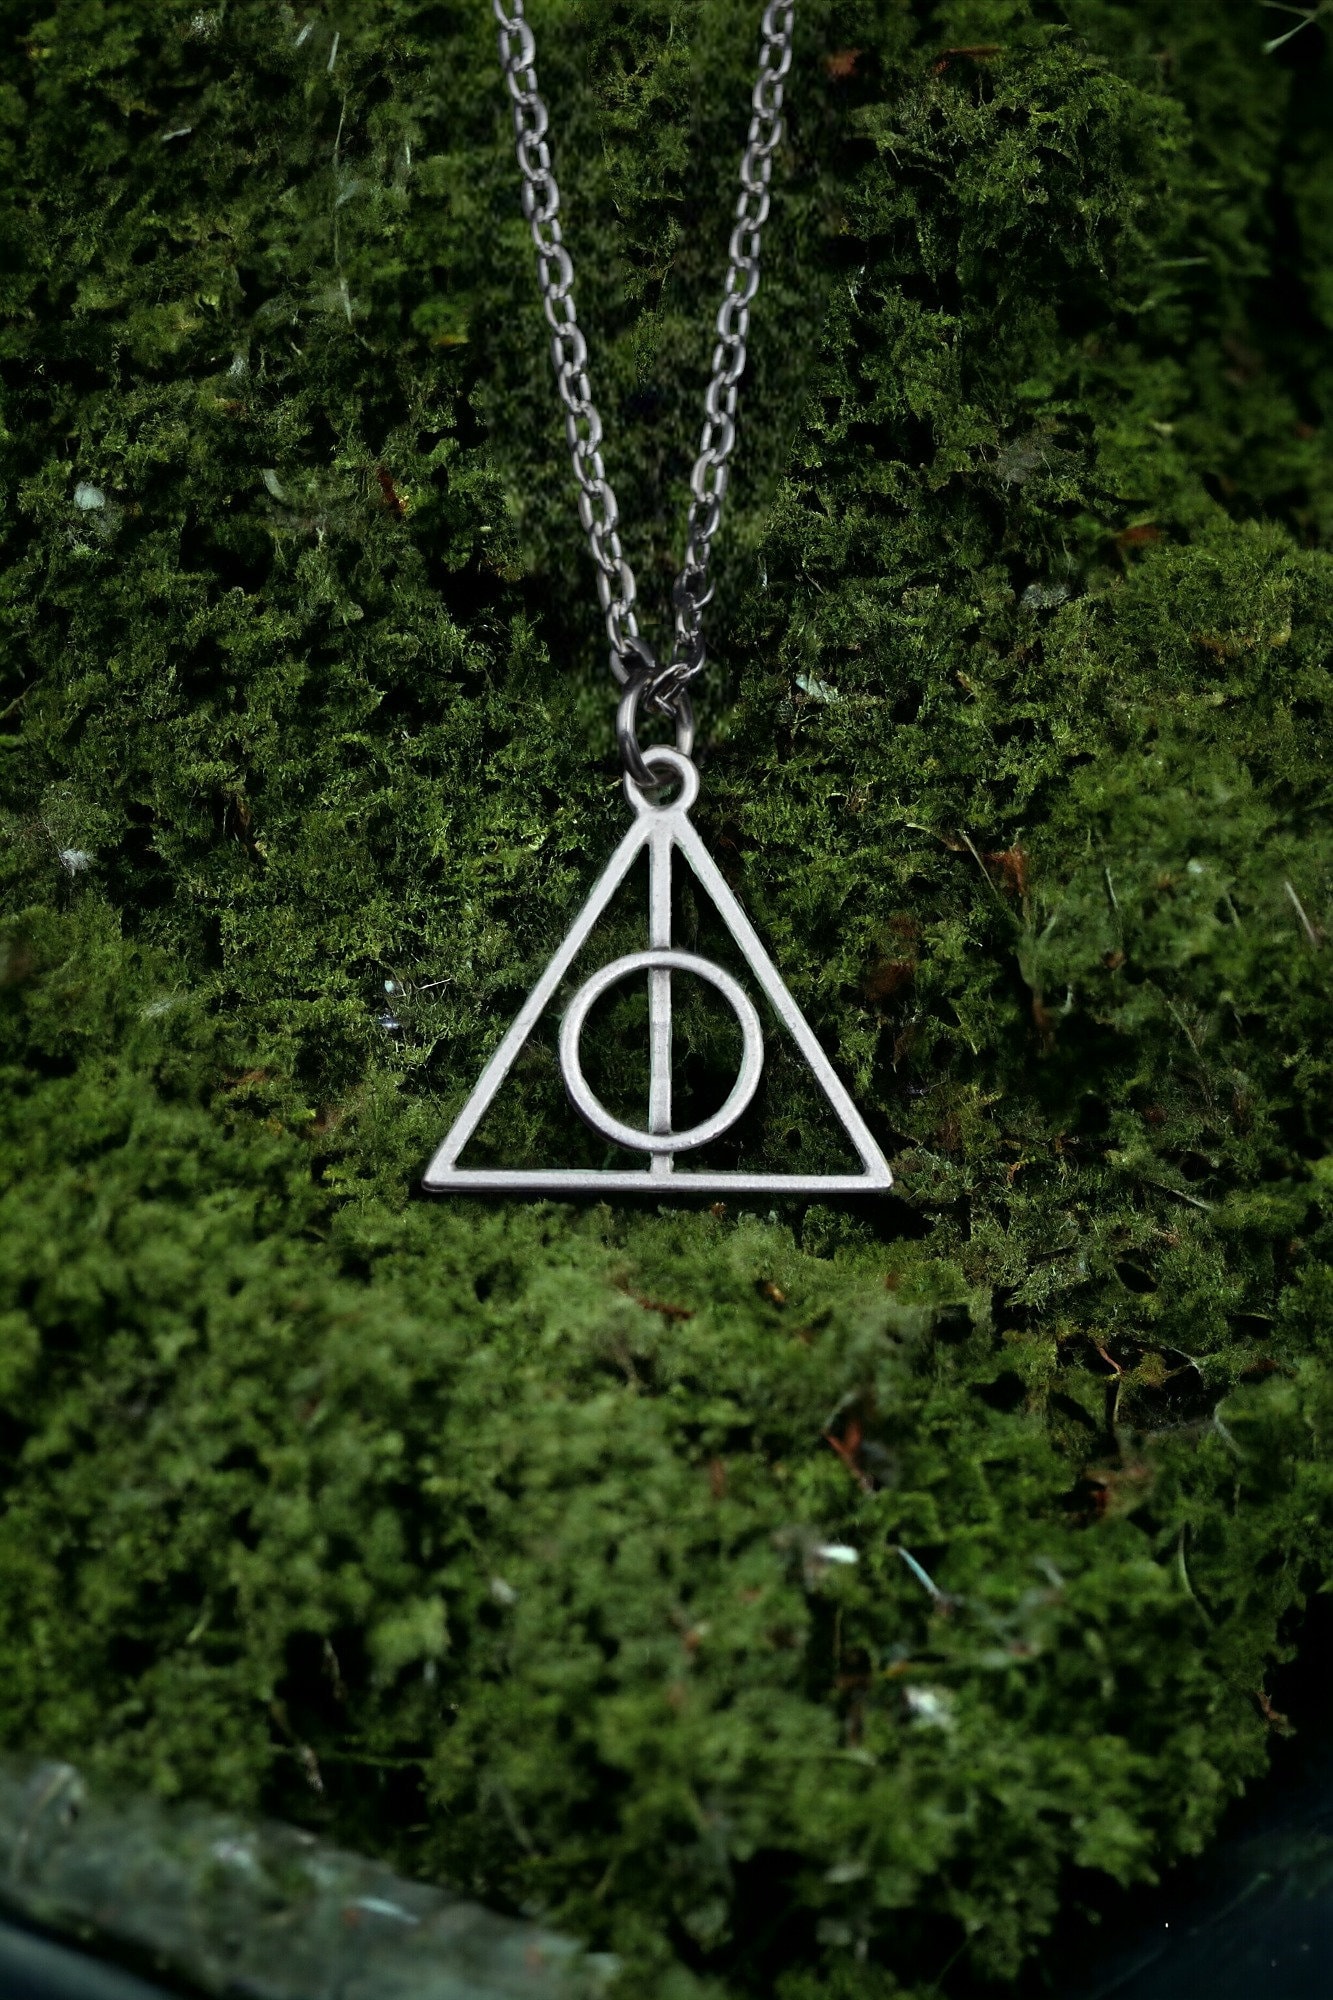 Harry Potter DEATHLY HALLOWS necklace - Enchanted Craft